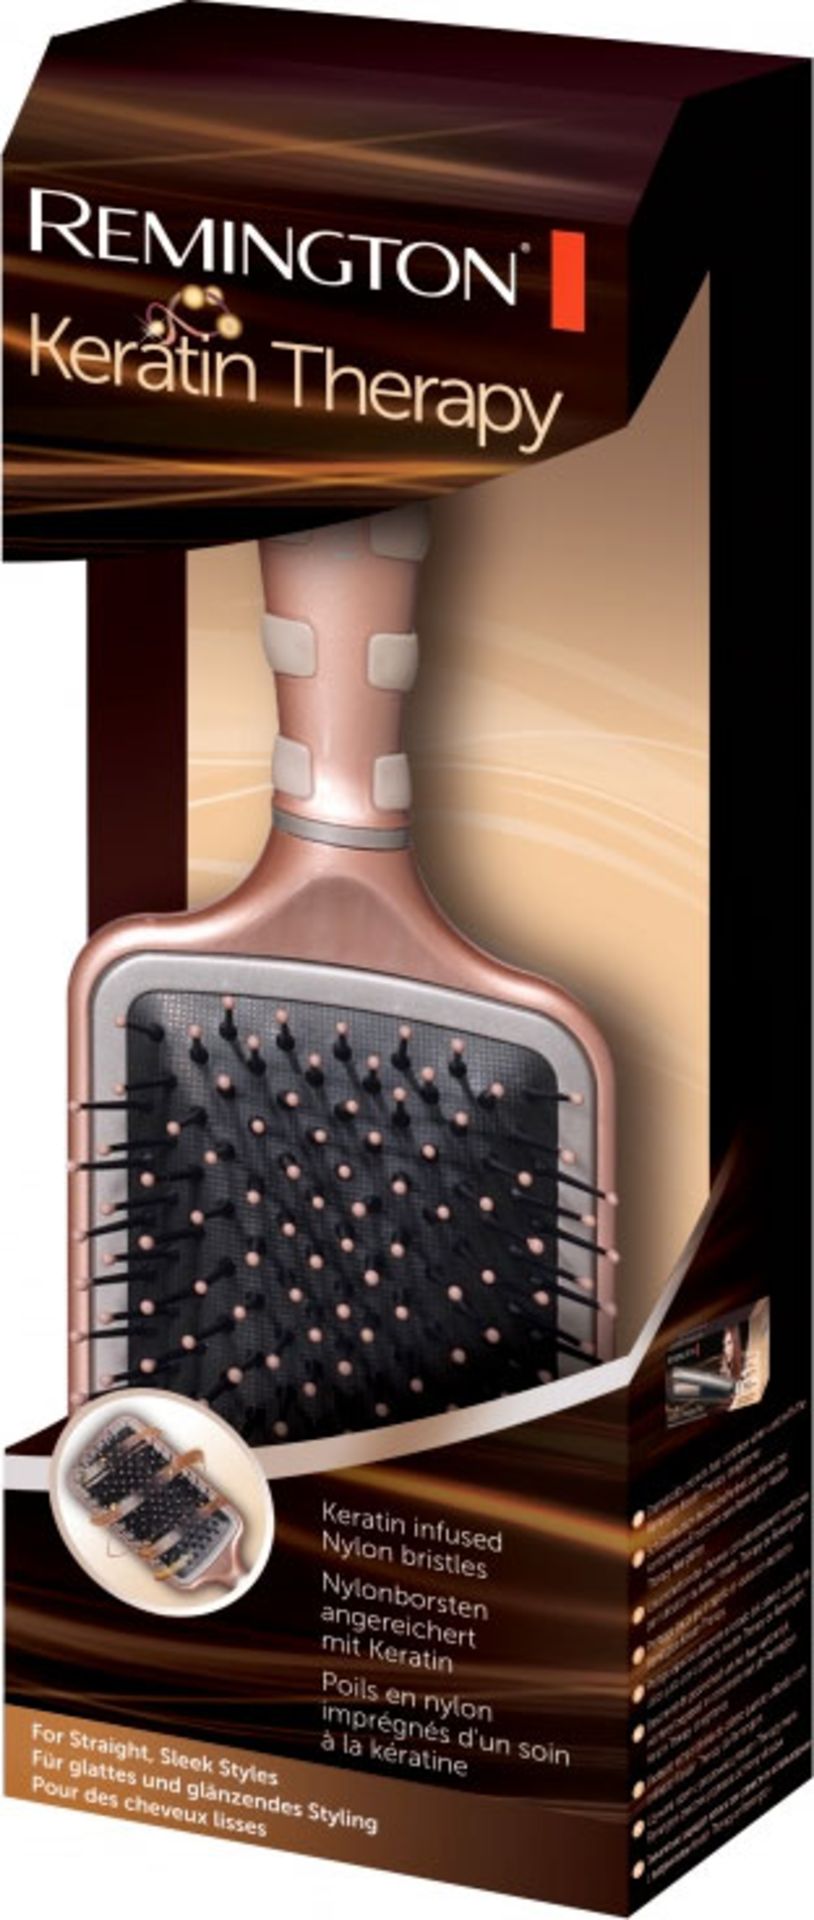 V Brand New Remington Keratin Therapy Paddle Hair Brush For Sleek Straight Styles With Keratin - Image 2 of 2